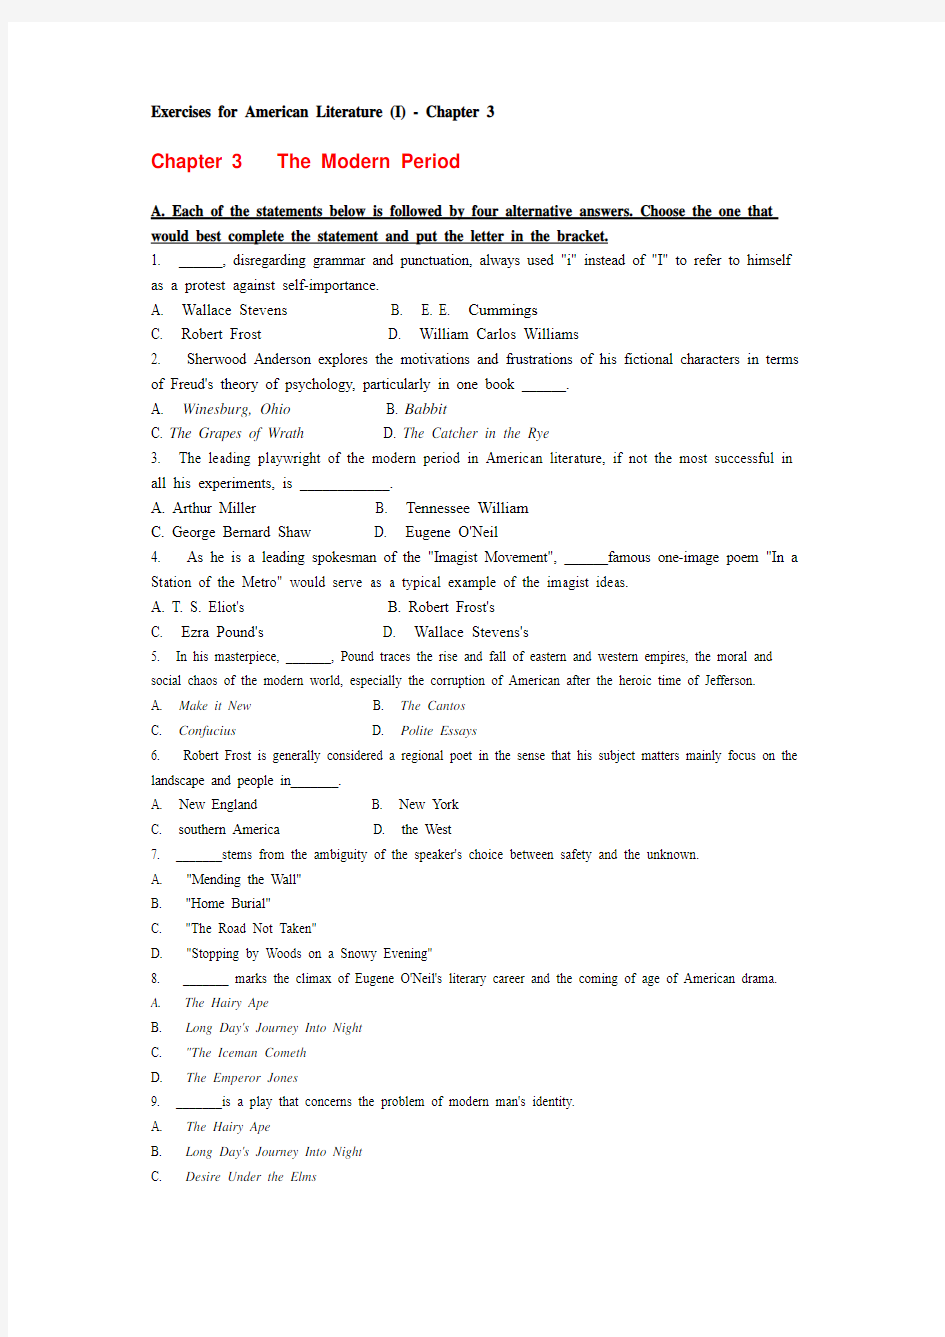 Exercises for American Literature (I) - Chapter 3(1)